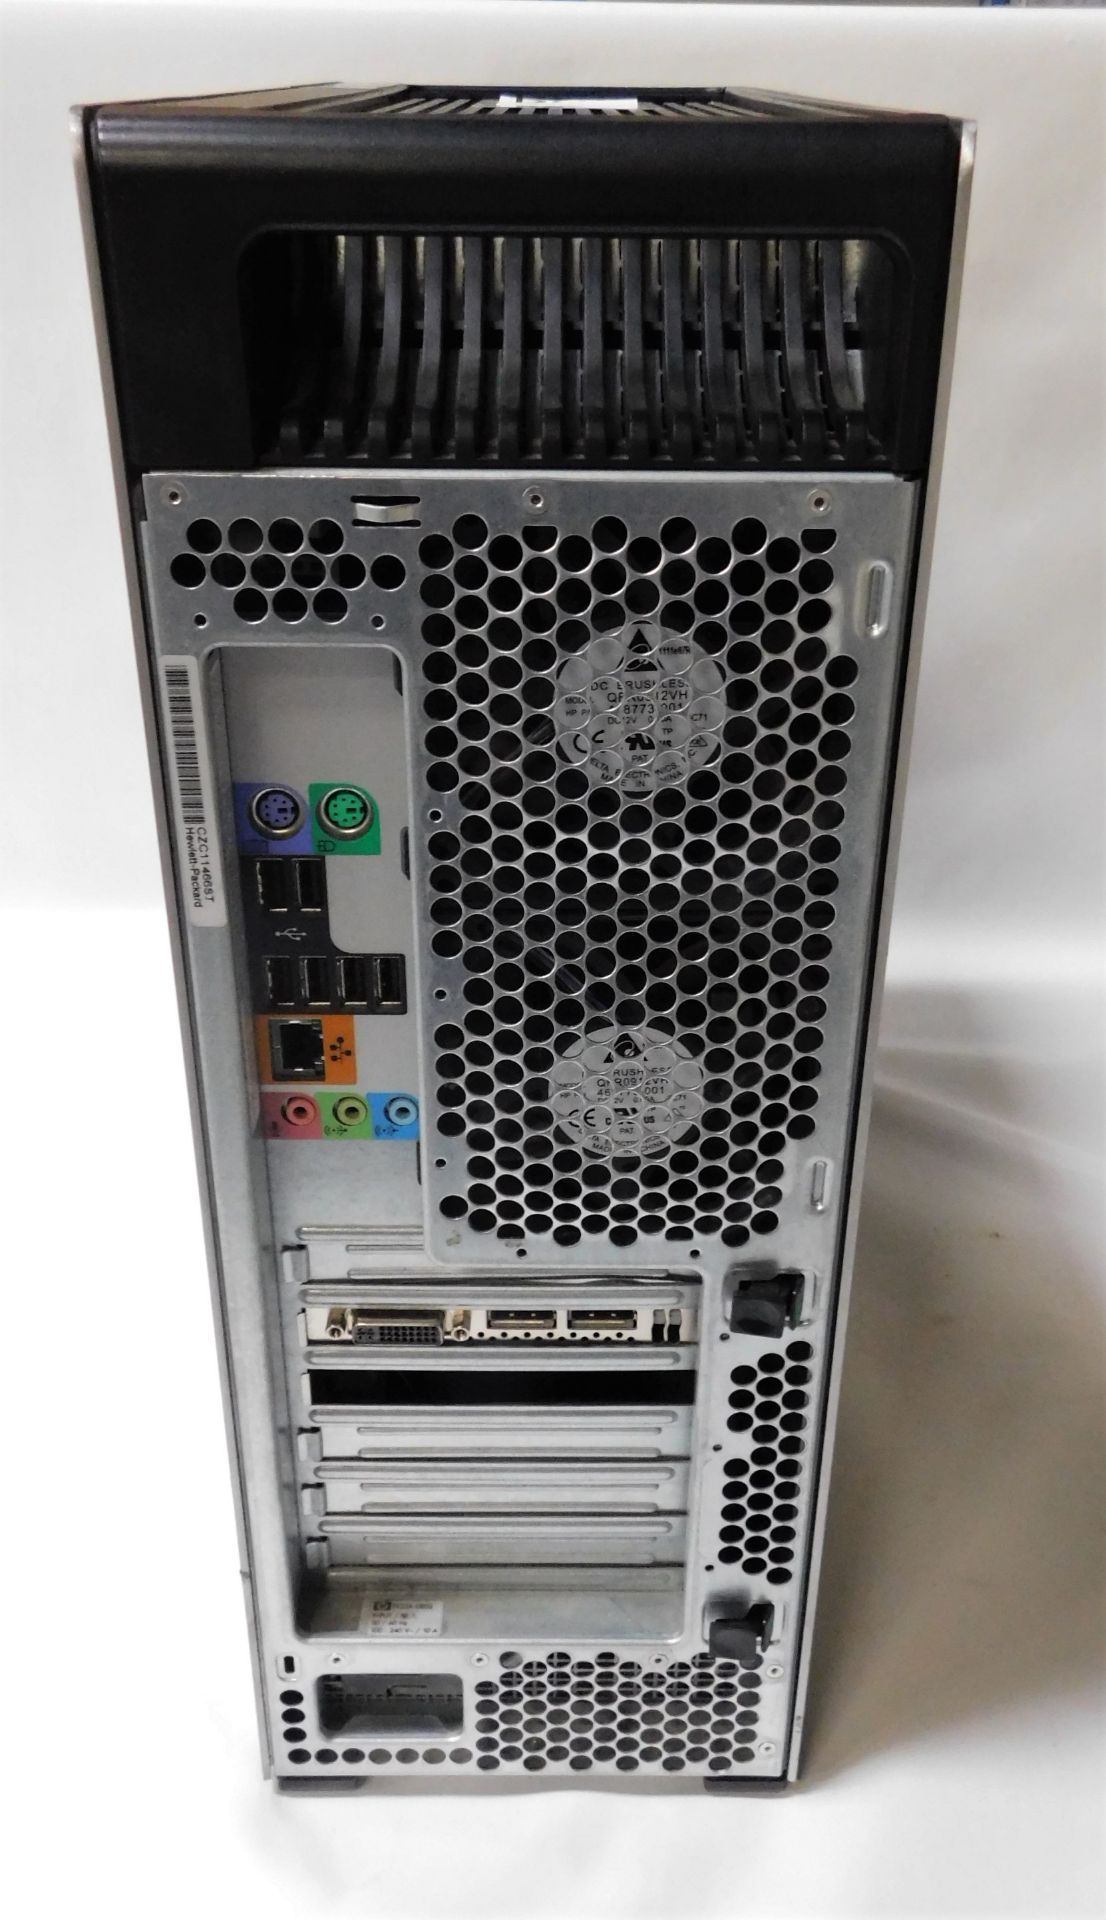 HP Z600 Xeon CPU X5650 Workstation, 2.67 GHz with 32 GB RAM & Quadro 4000 Video Card (Location - Image 3 of 3